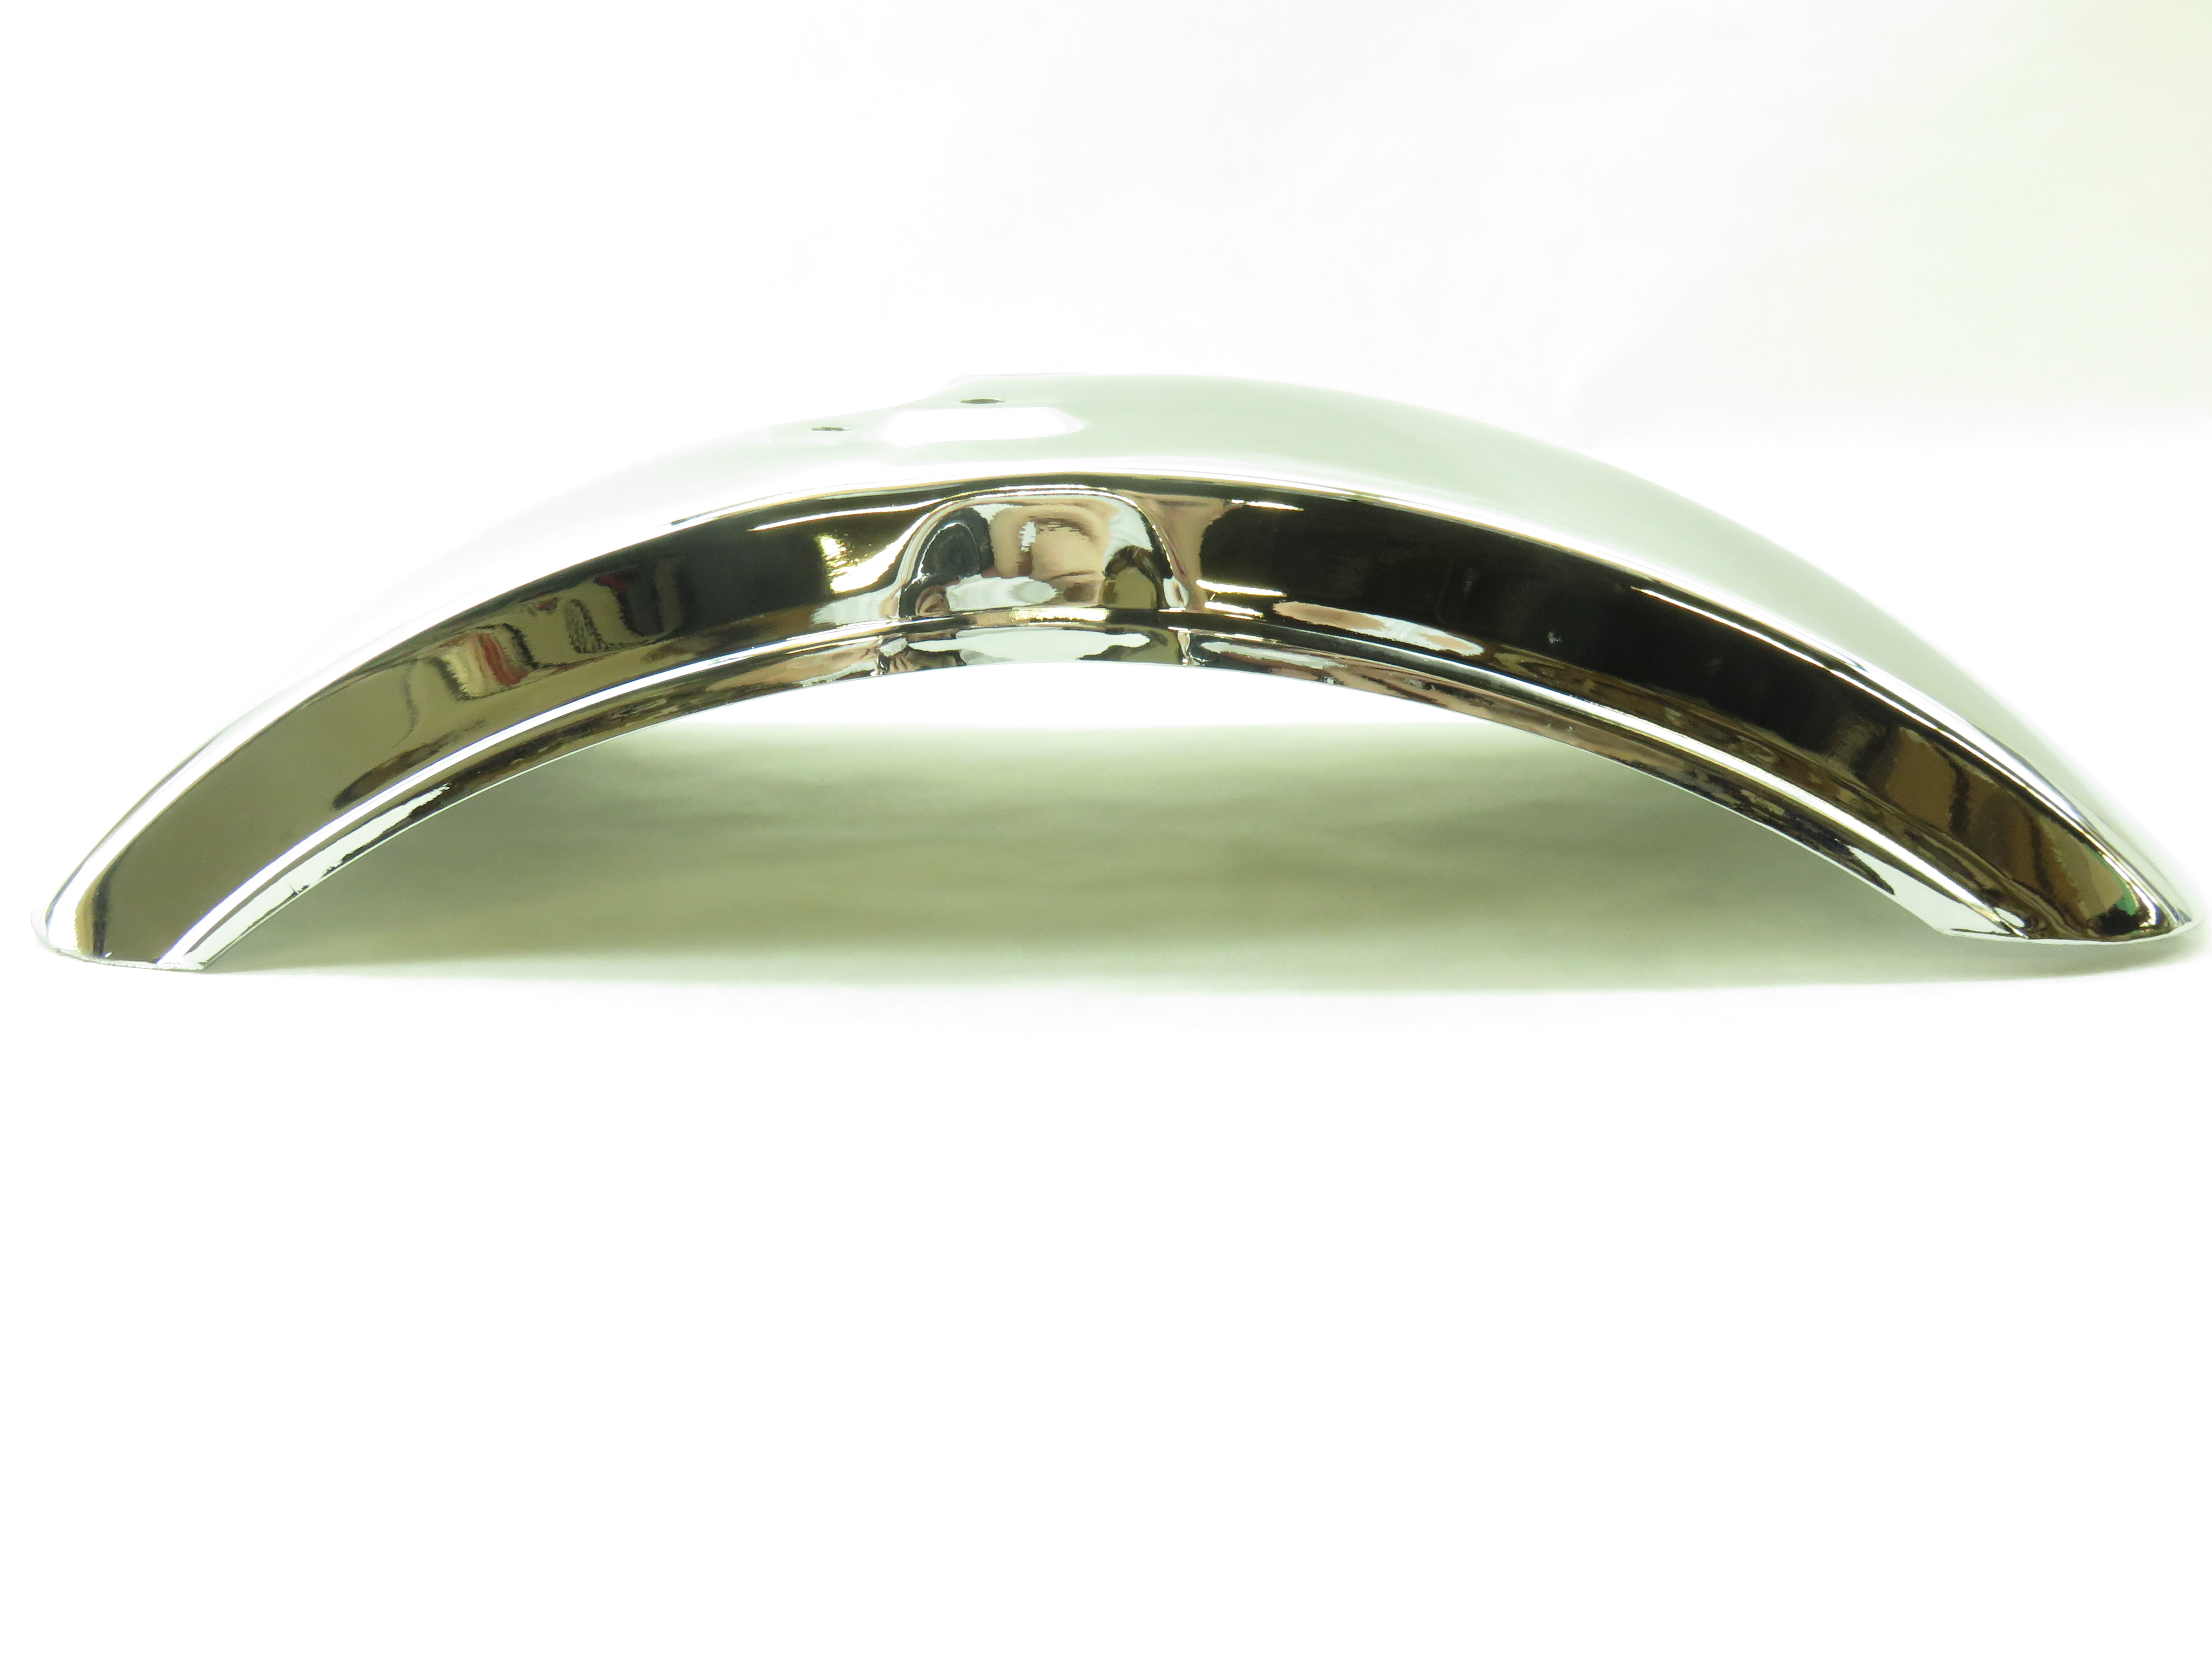 TBParts - Front Fender for CT70 K1-78 - TBW1193-IN-STOCK - CT70 Chassis